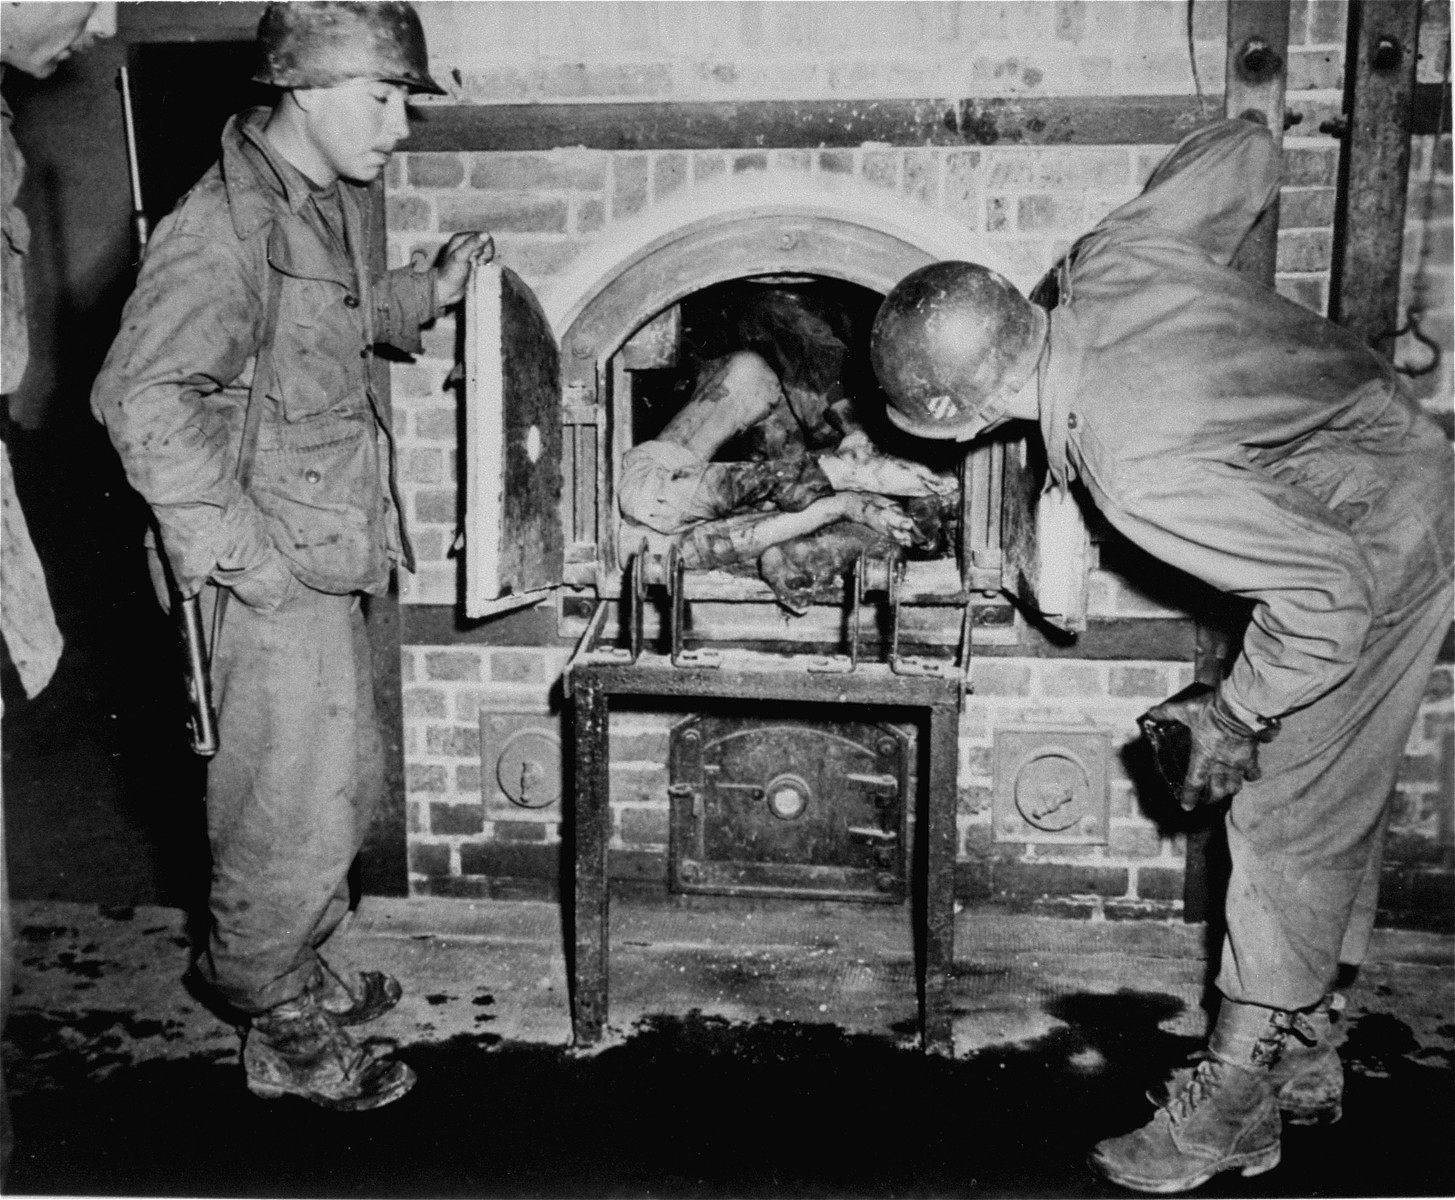 American soldiers inspecting the crematorium in Dachau.  The corpse was put into the ovens after liberation to simulate the operation of the furnace.